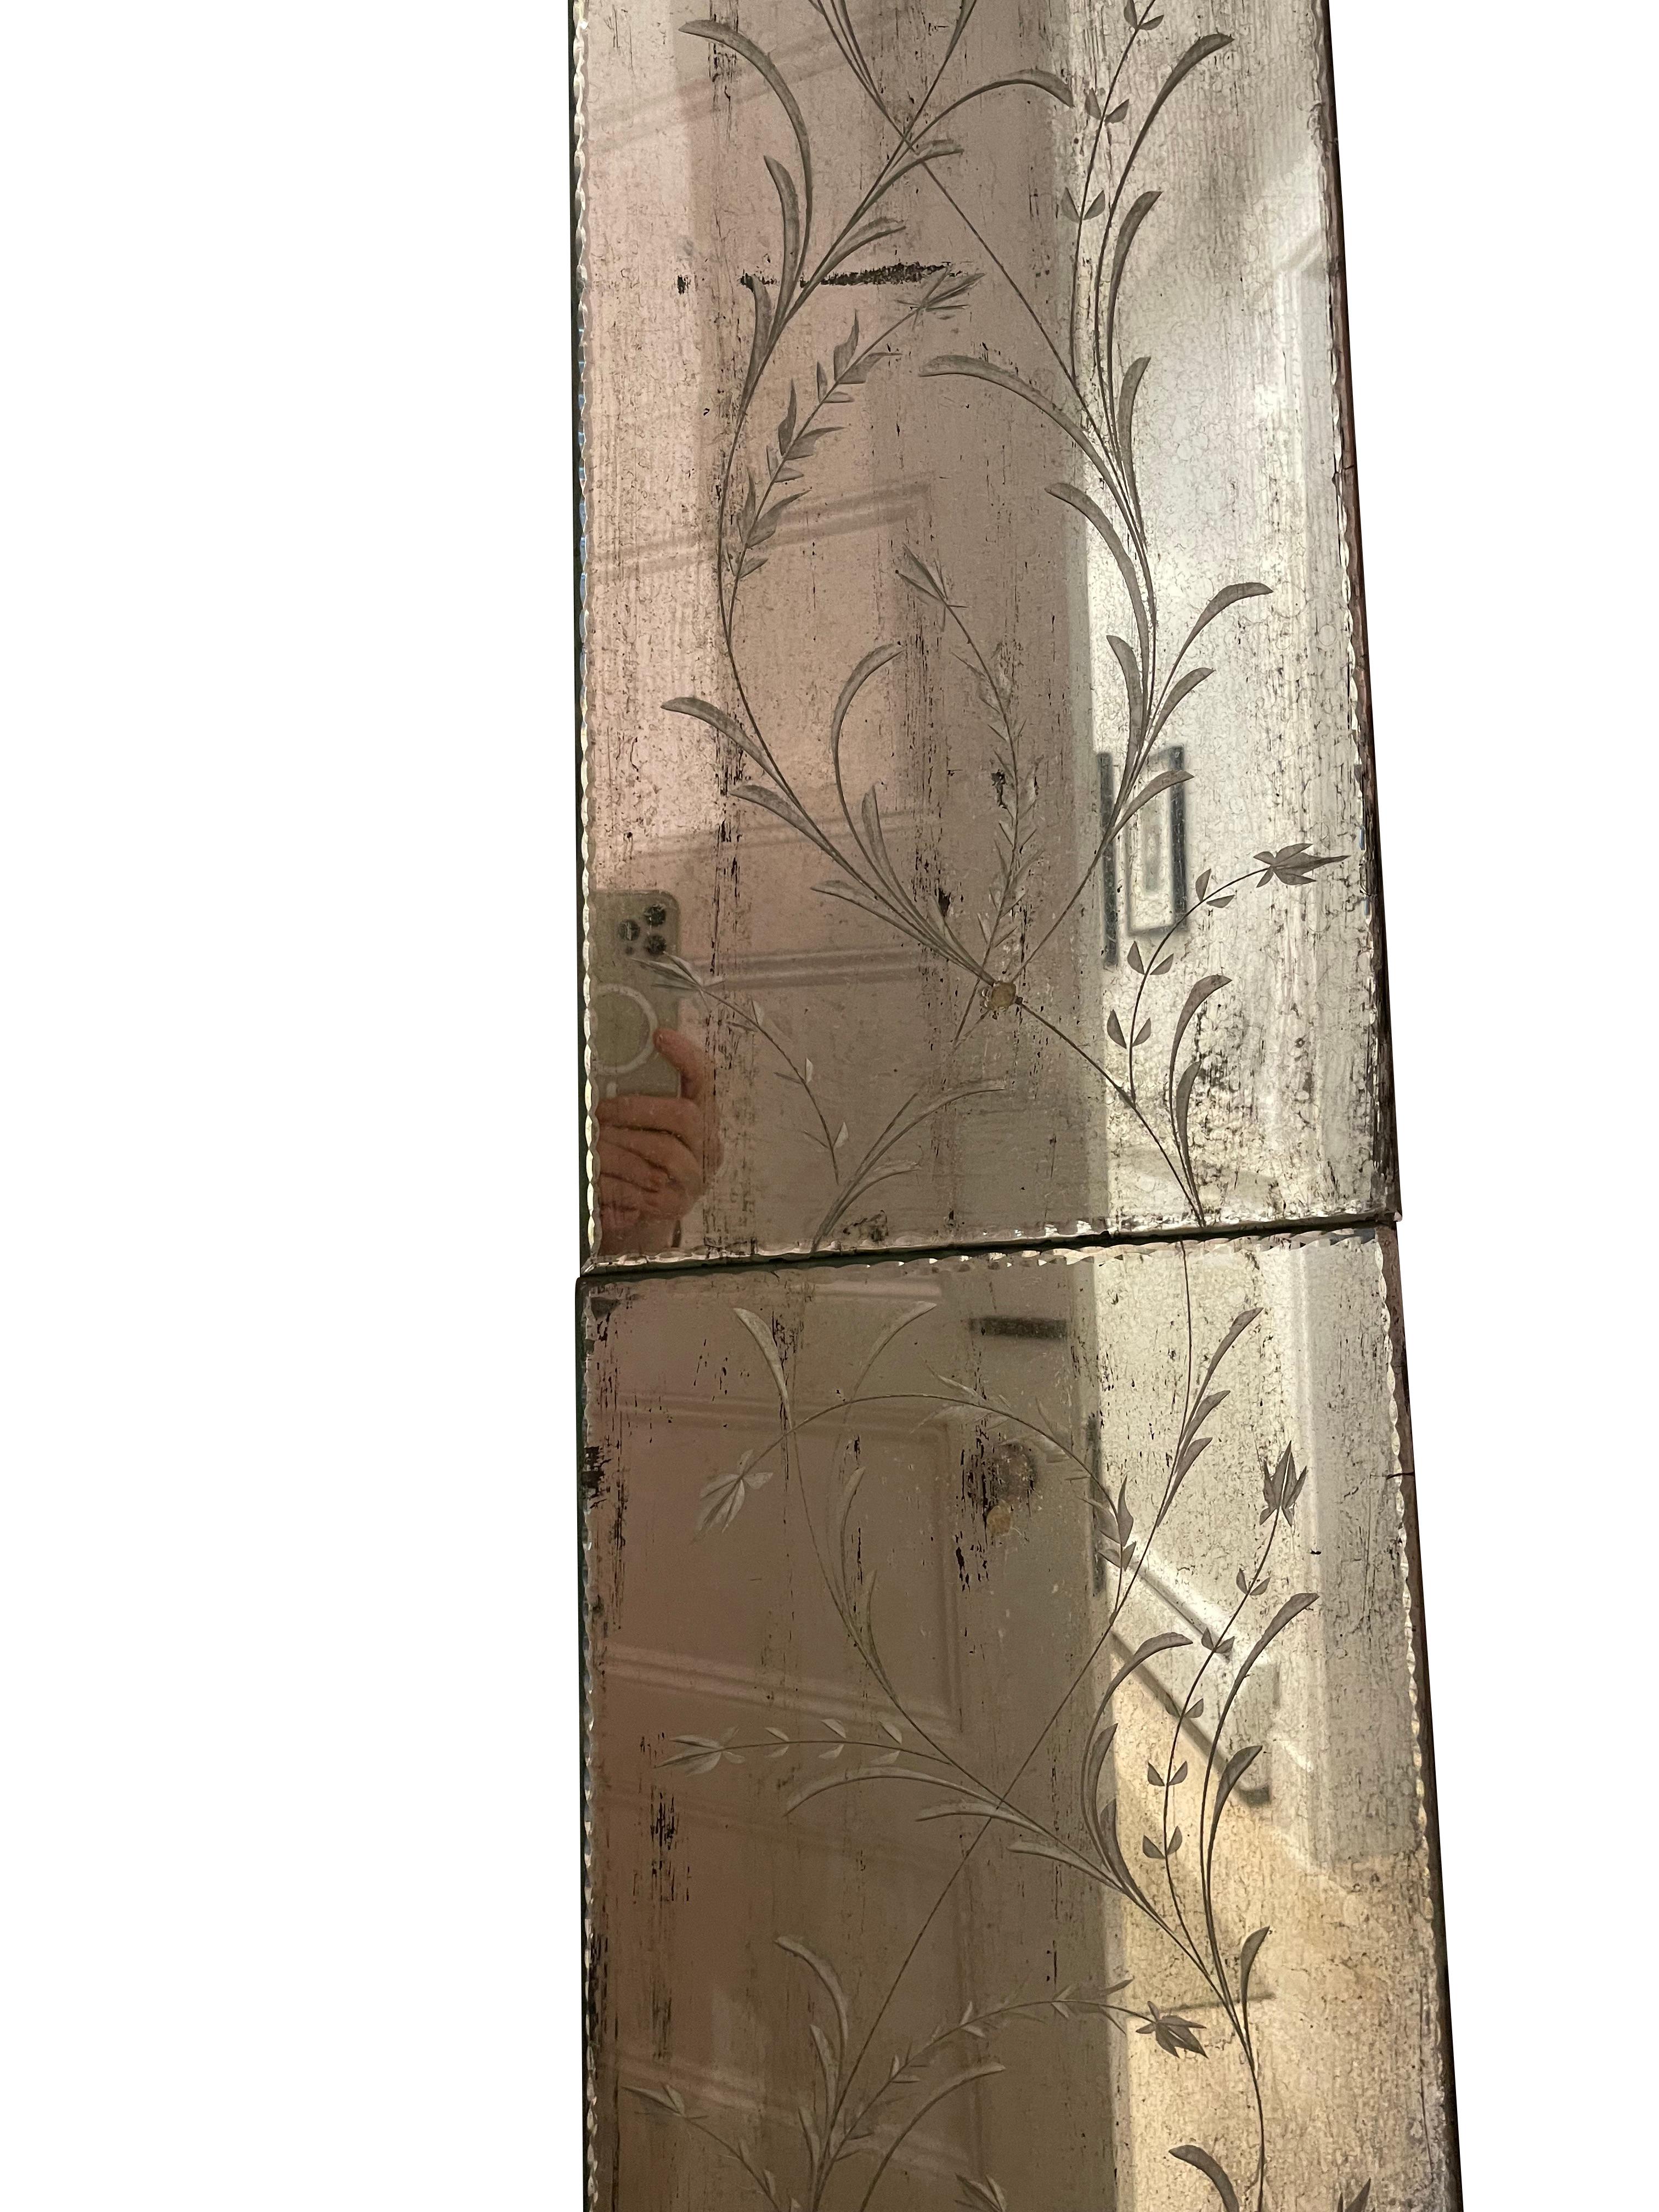 Etched Pair of Obelisk Mirrored Panels with Botanical Etchings